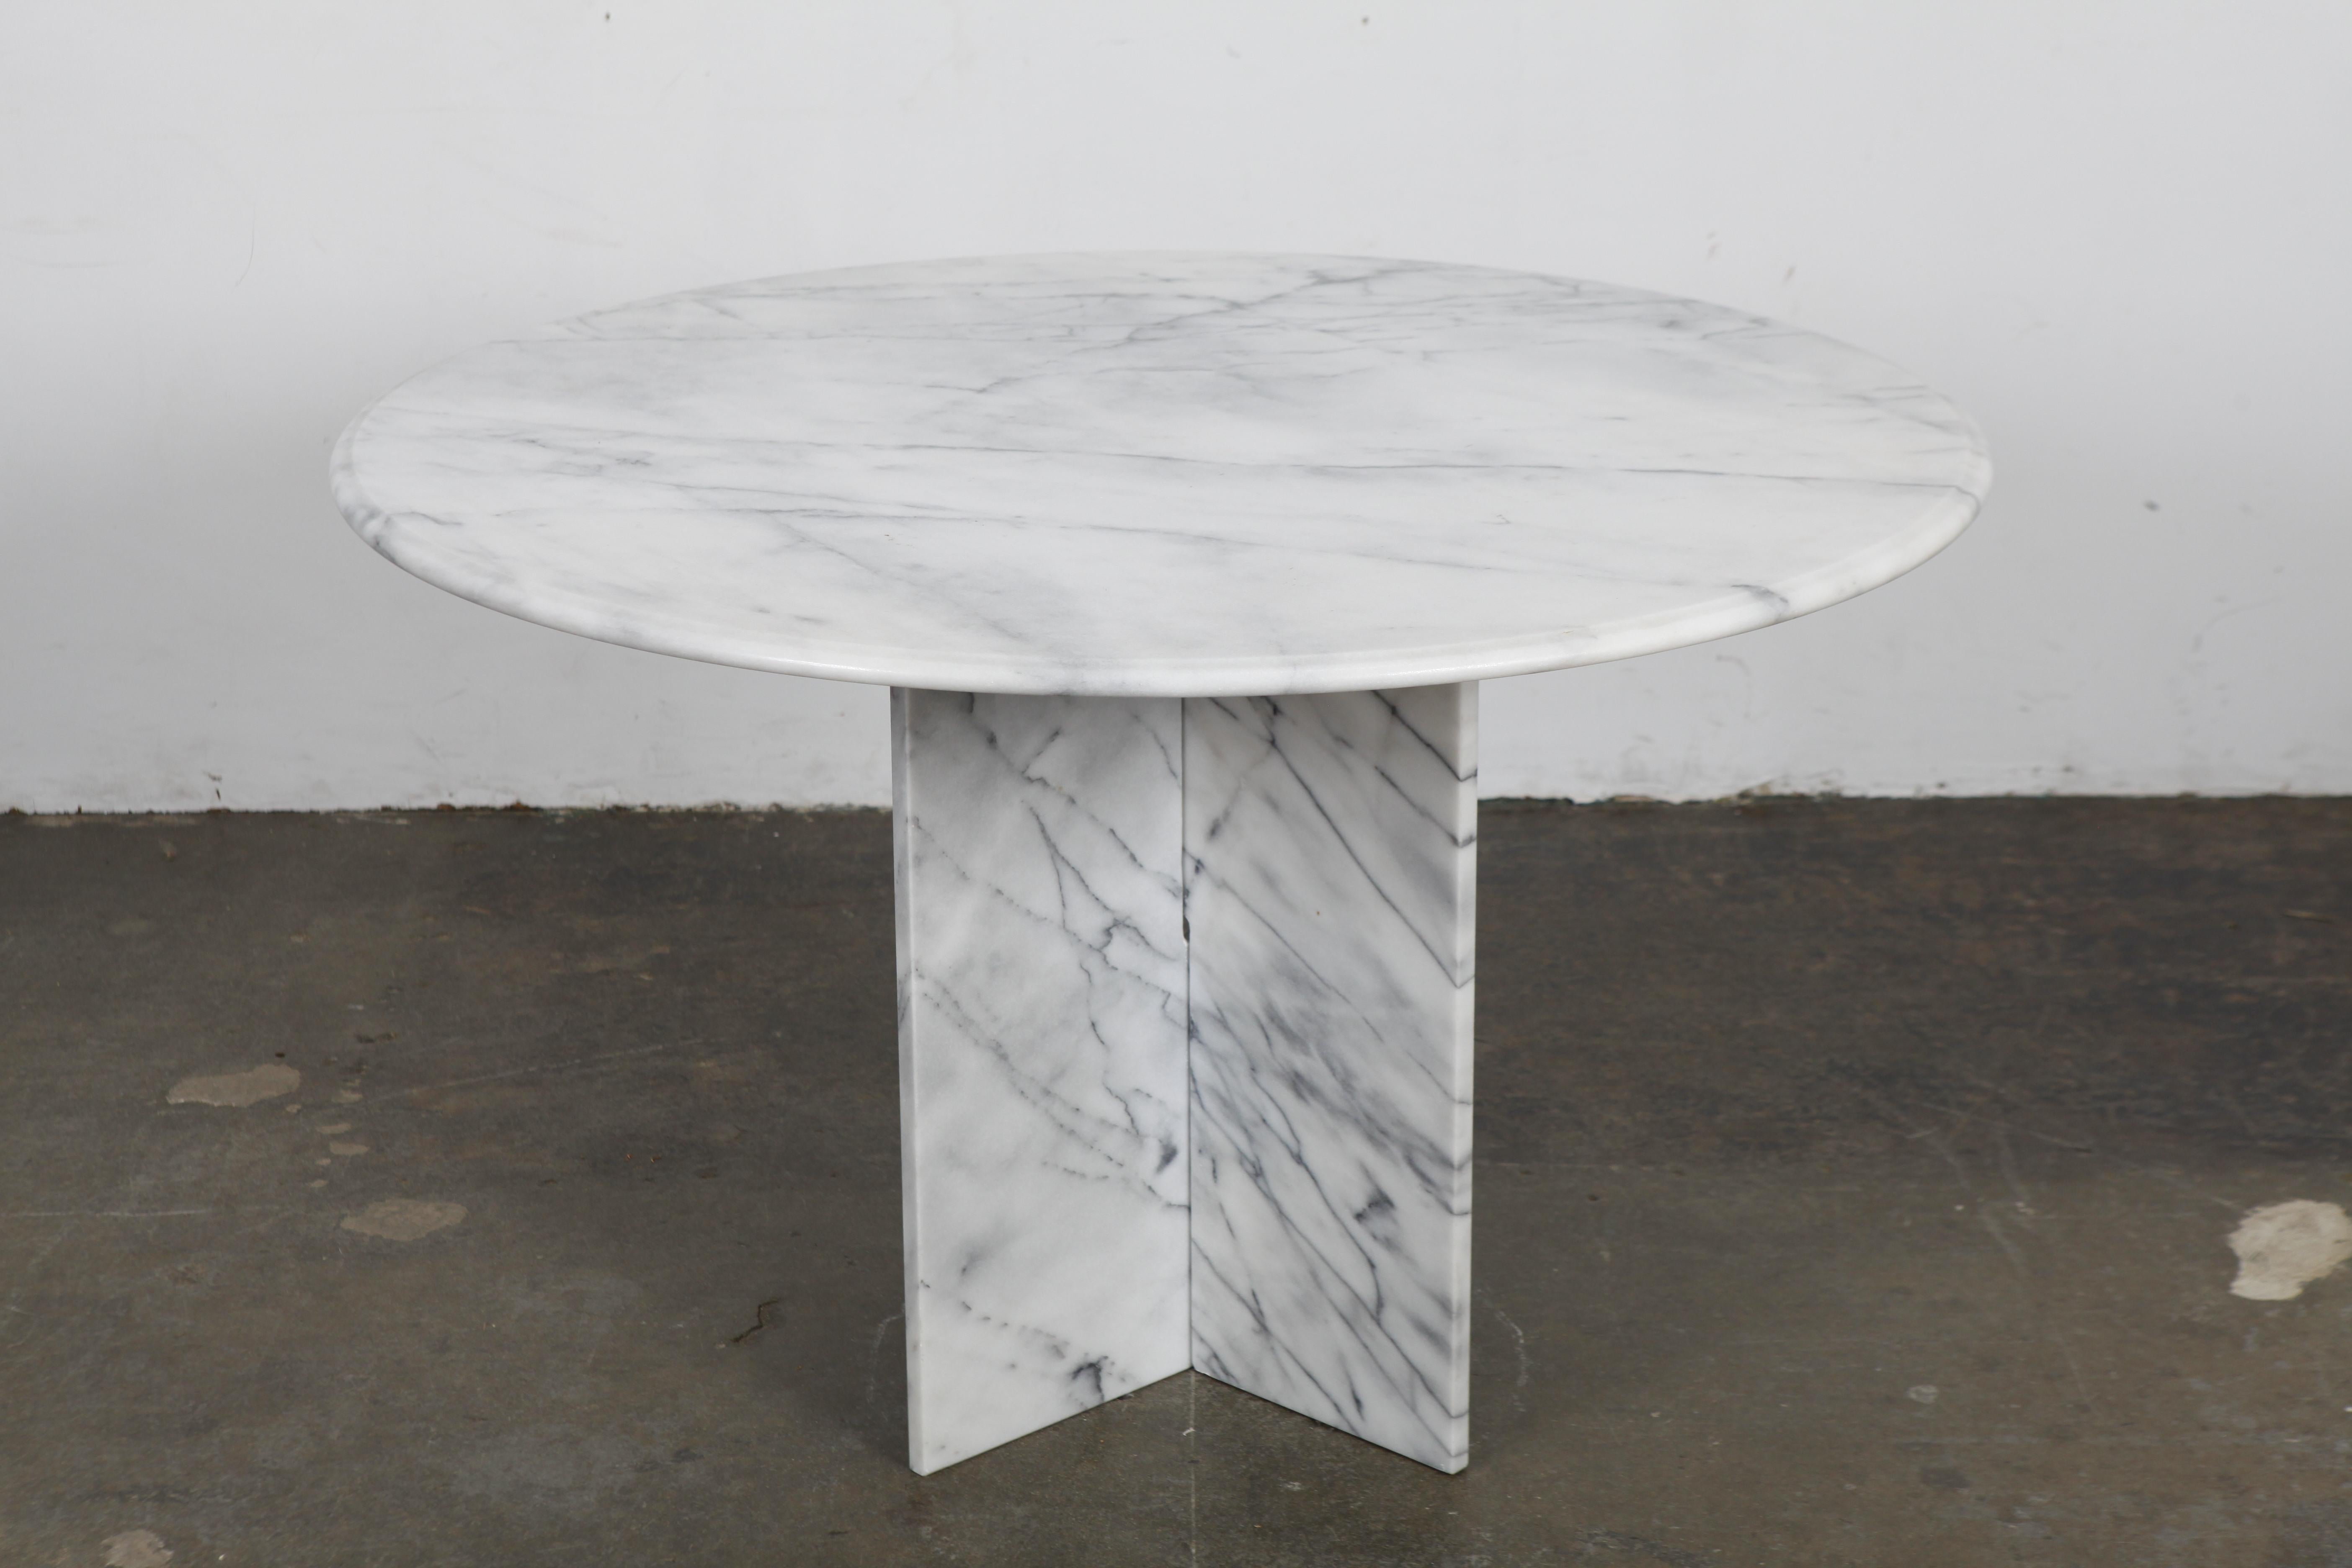 1970s Carrara marble round top dining table with 'X' style pedestal base, with a polished top. Nice size for a small 4-seat dining or breakfast table, Italy. No chips or damage in the top.